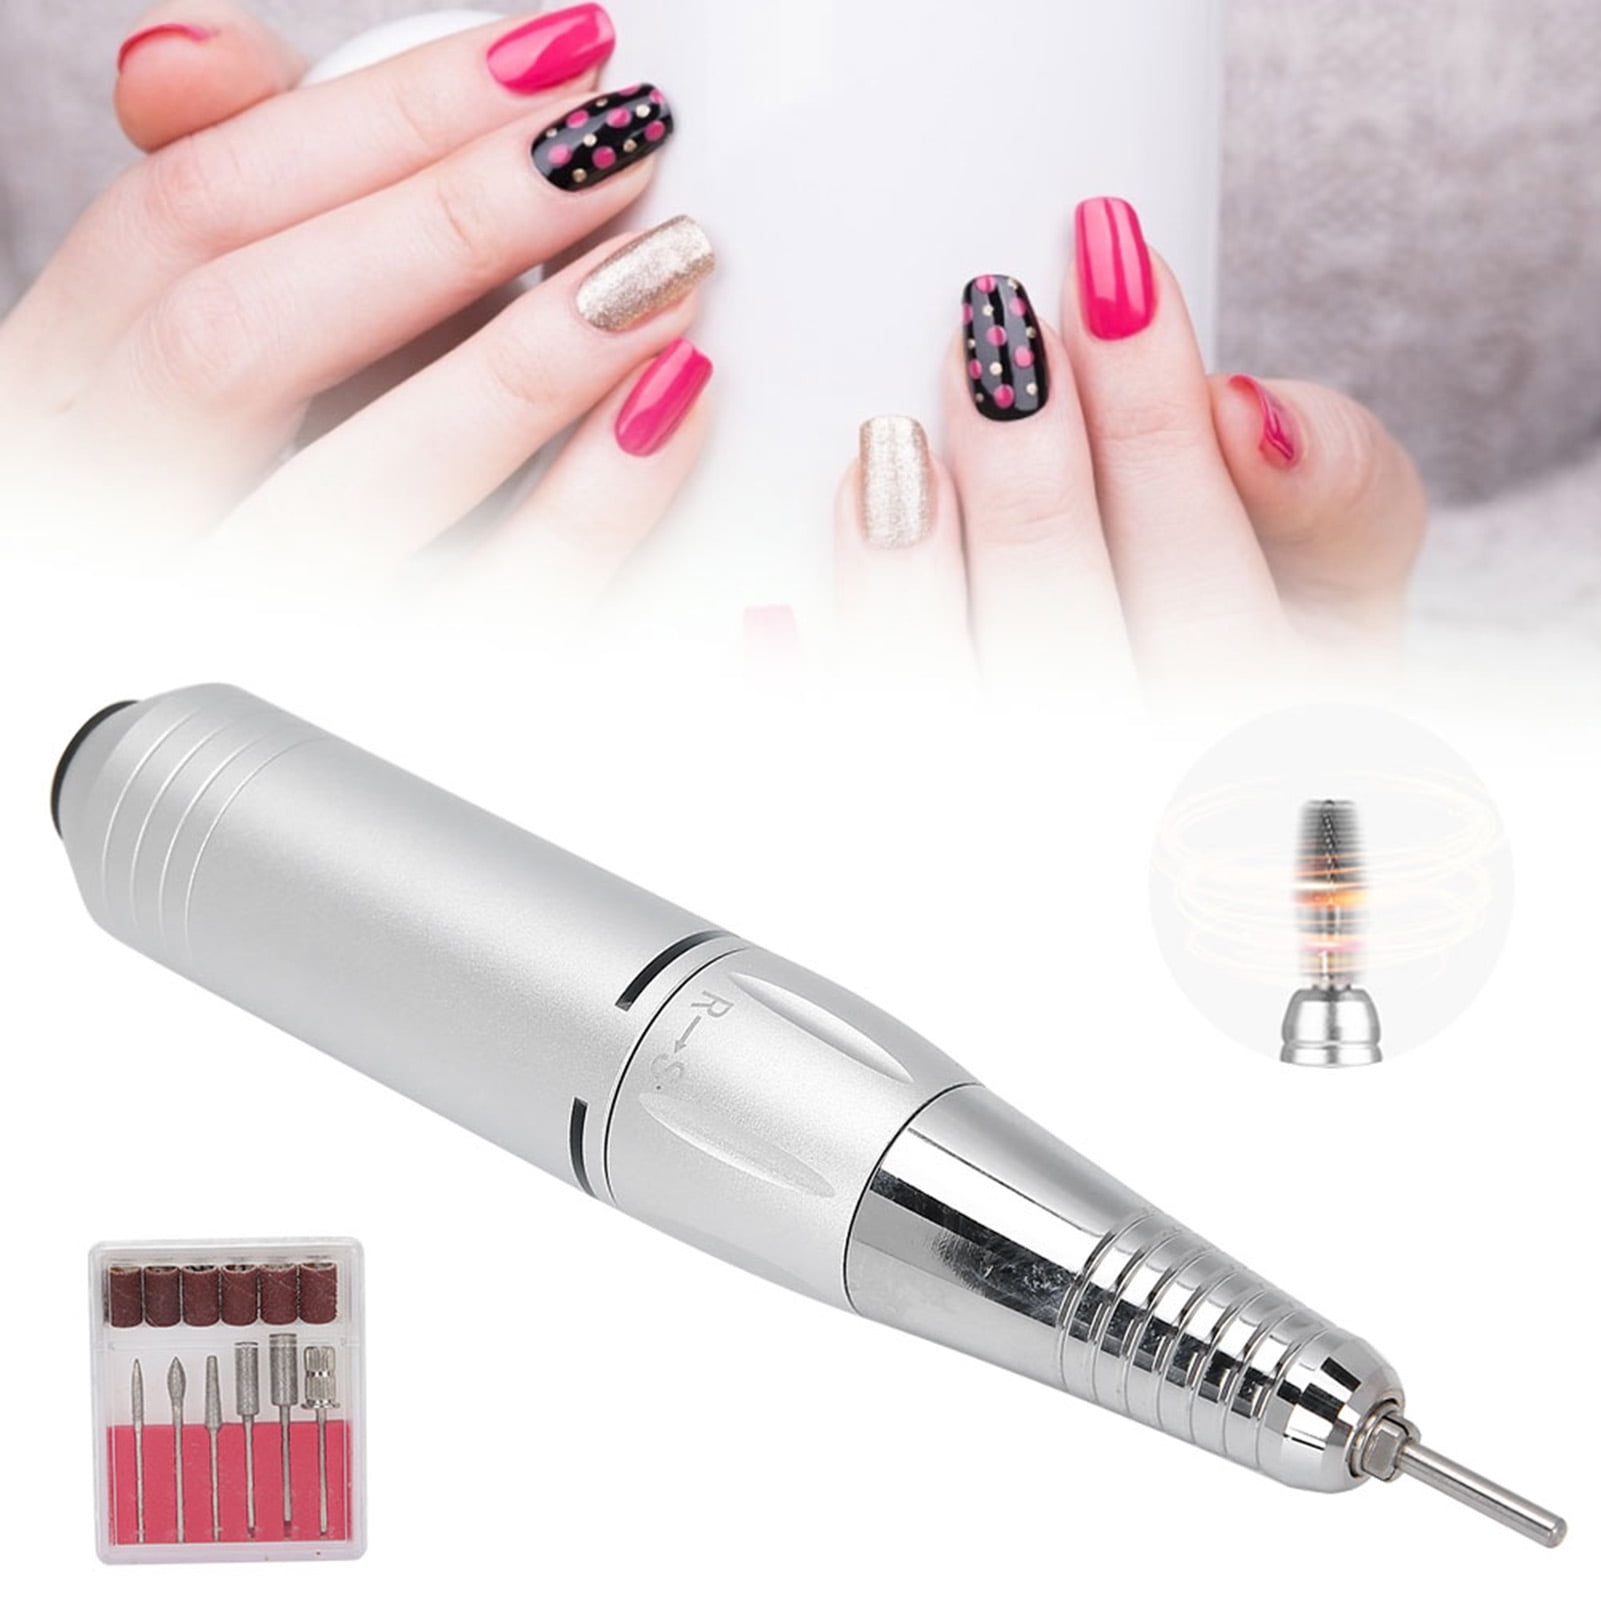 Nail Drill Electric Apparatus for Manicure 10pcs Milling Cutters Drill Bits  Set Gel Cuticle Remover Pedicure Machine Nail Art - Price history & Review  | AliExpress Seller - Shop3884003 Store | Alitools.io